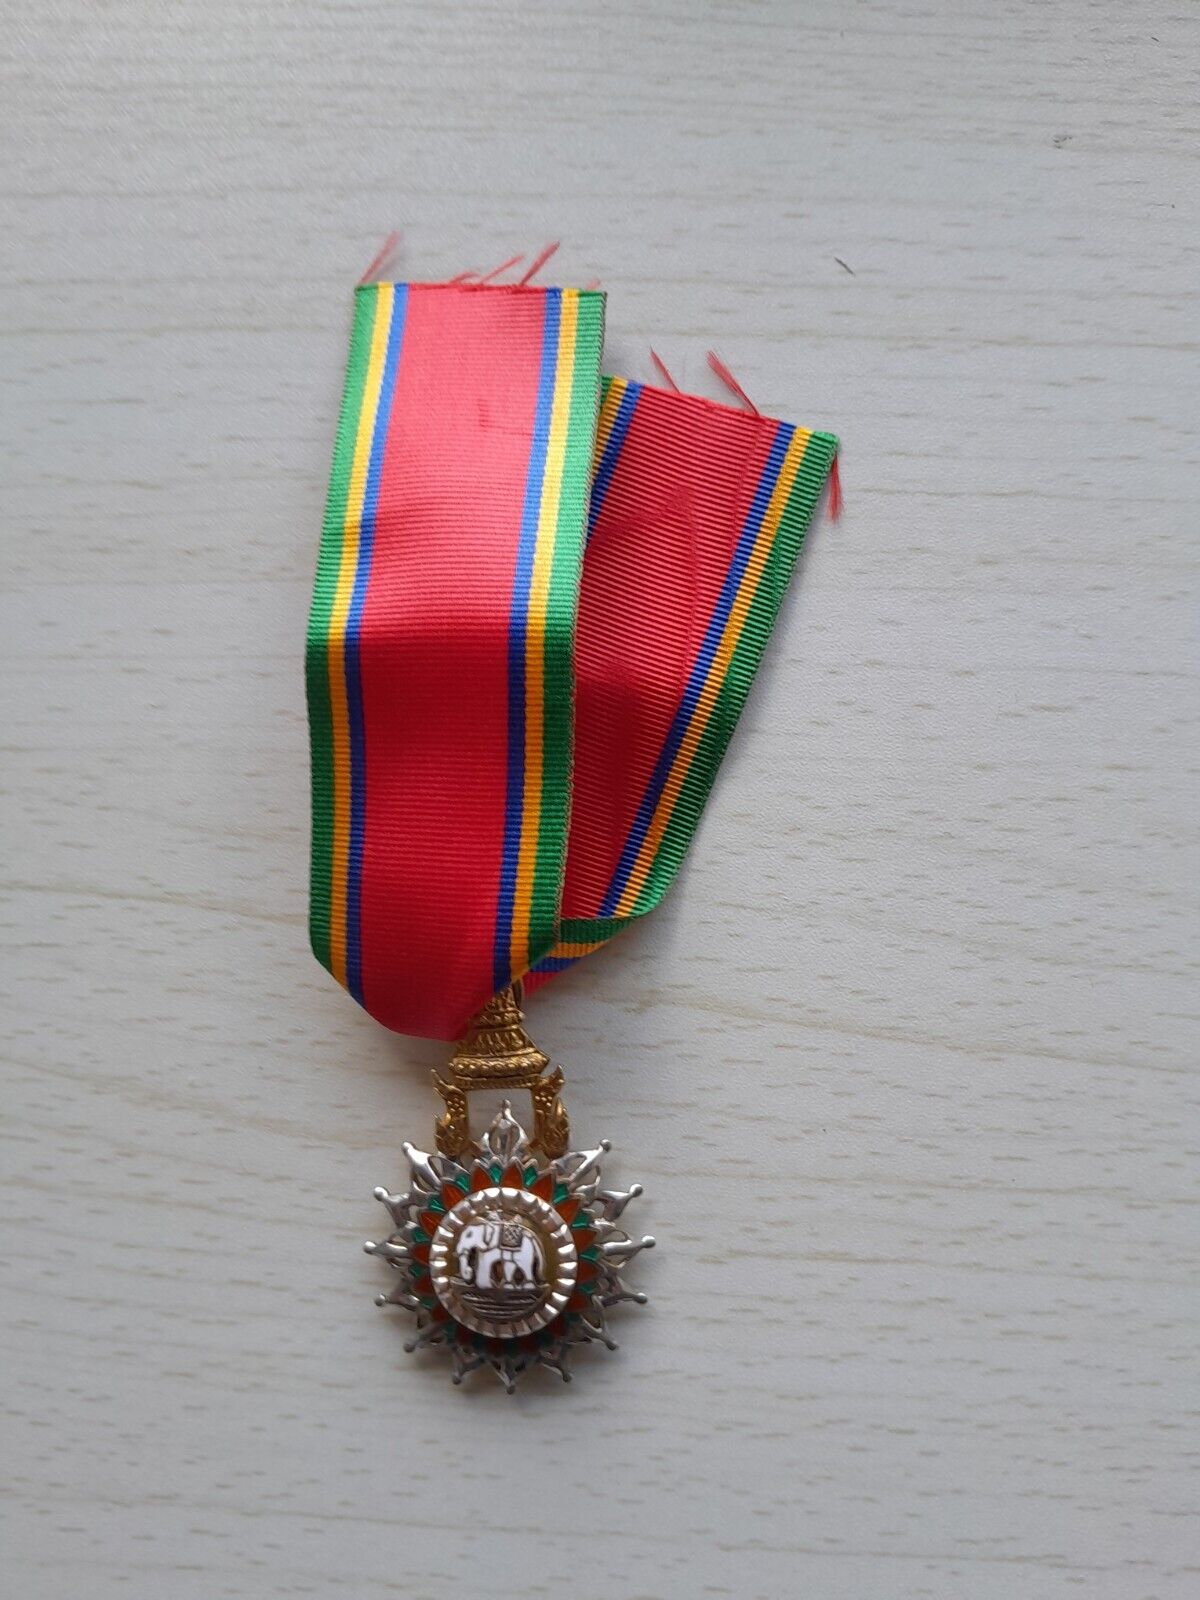 THAILAND ORDER OF THE WHITE ELEPHANT-5TH CLASS